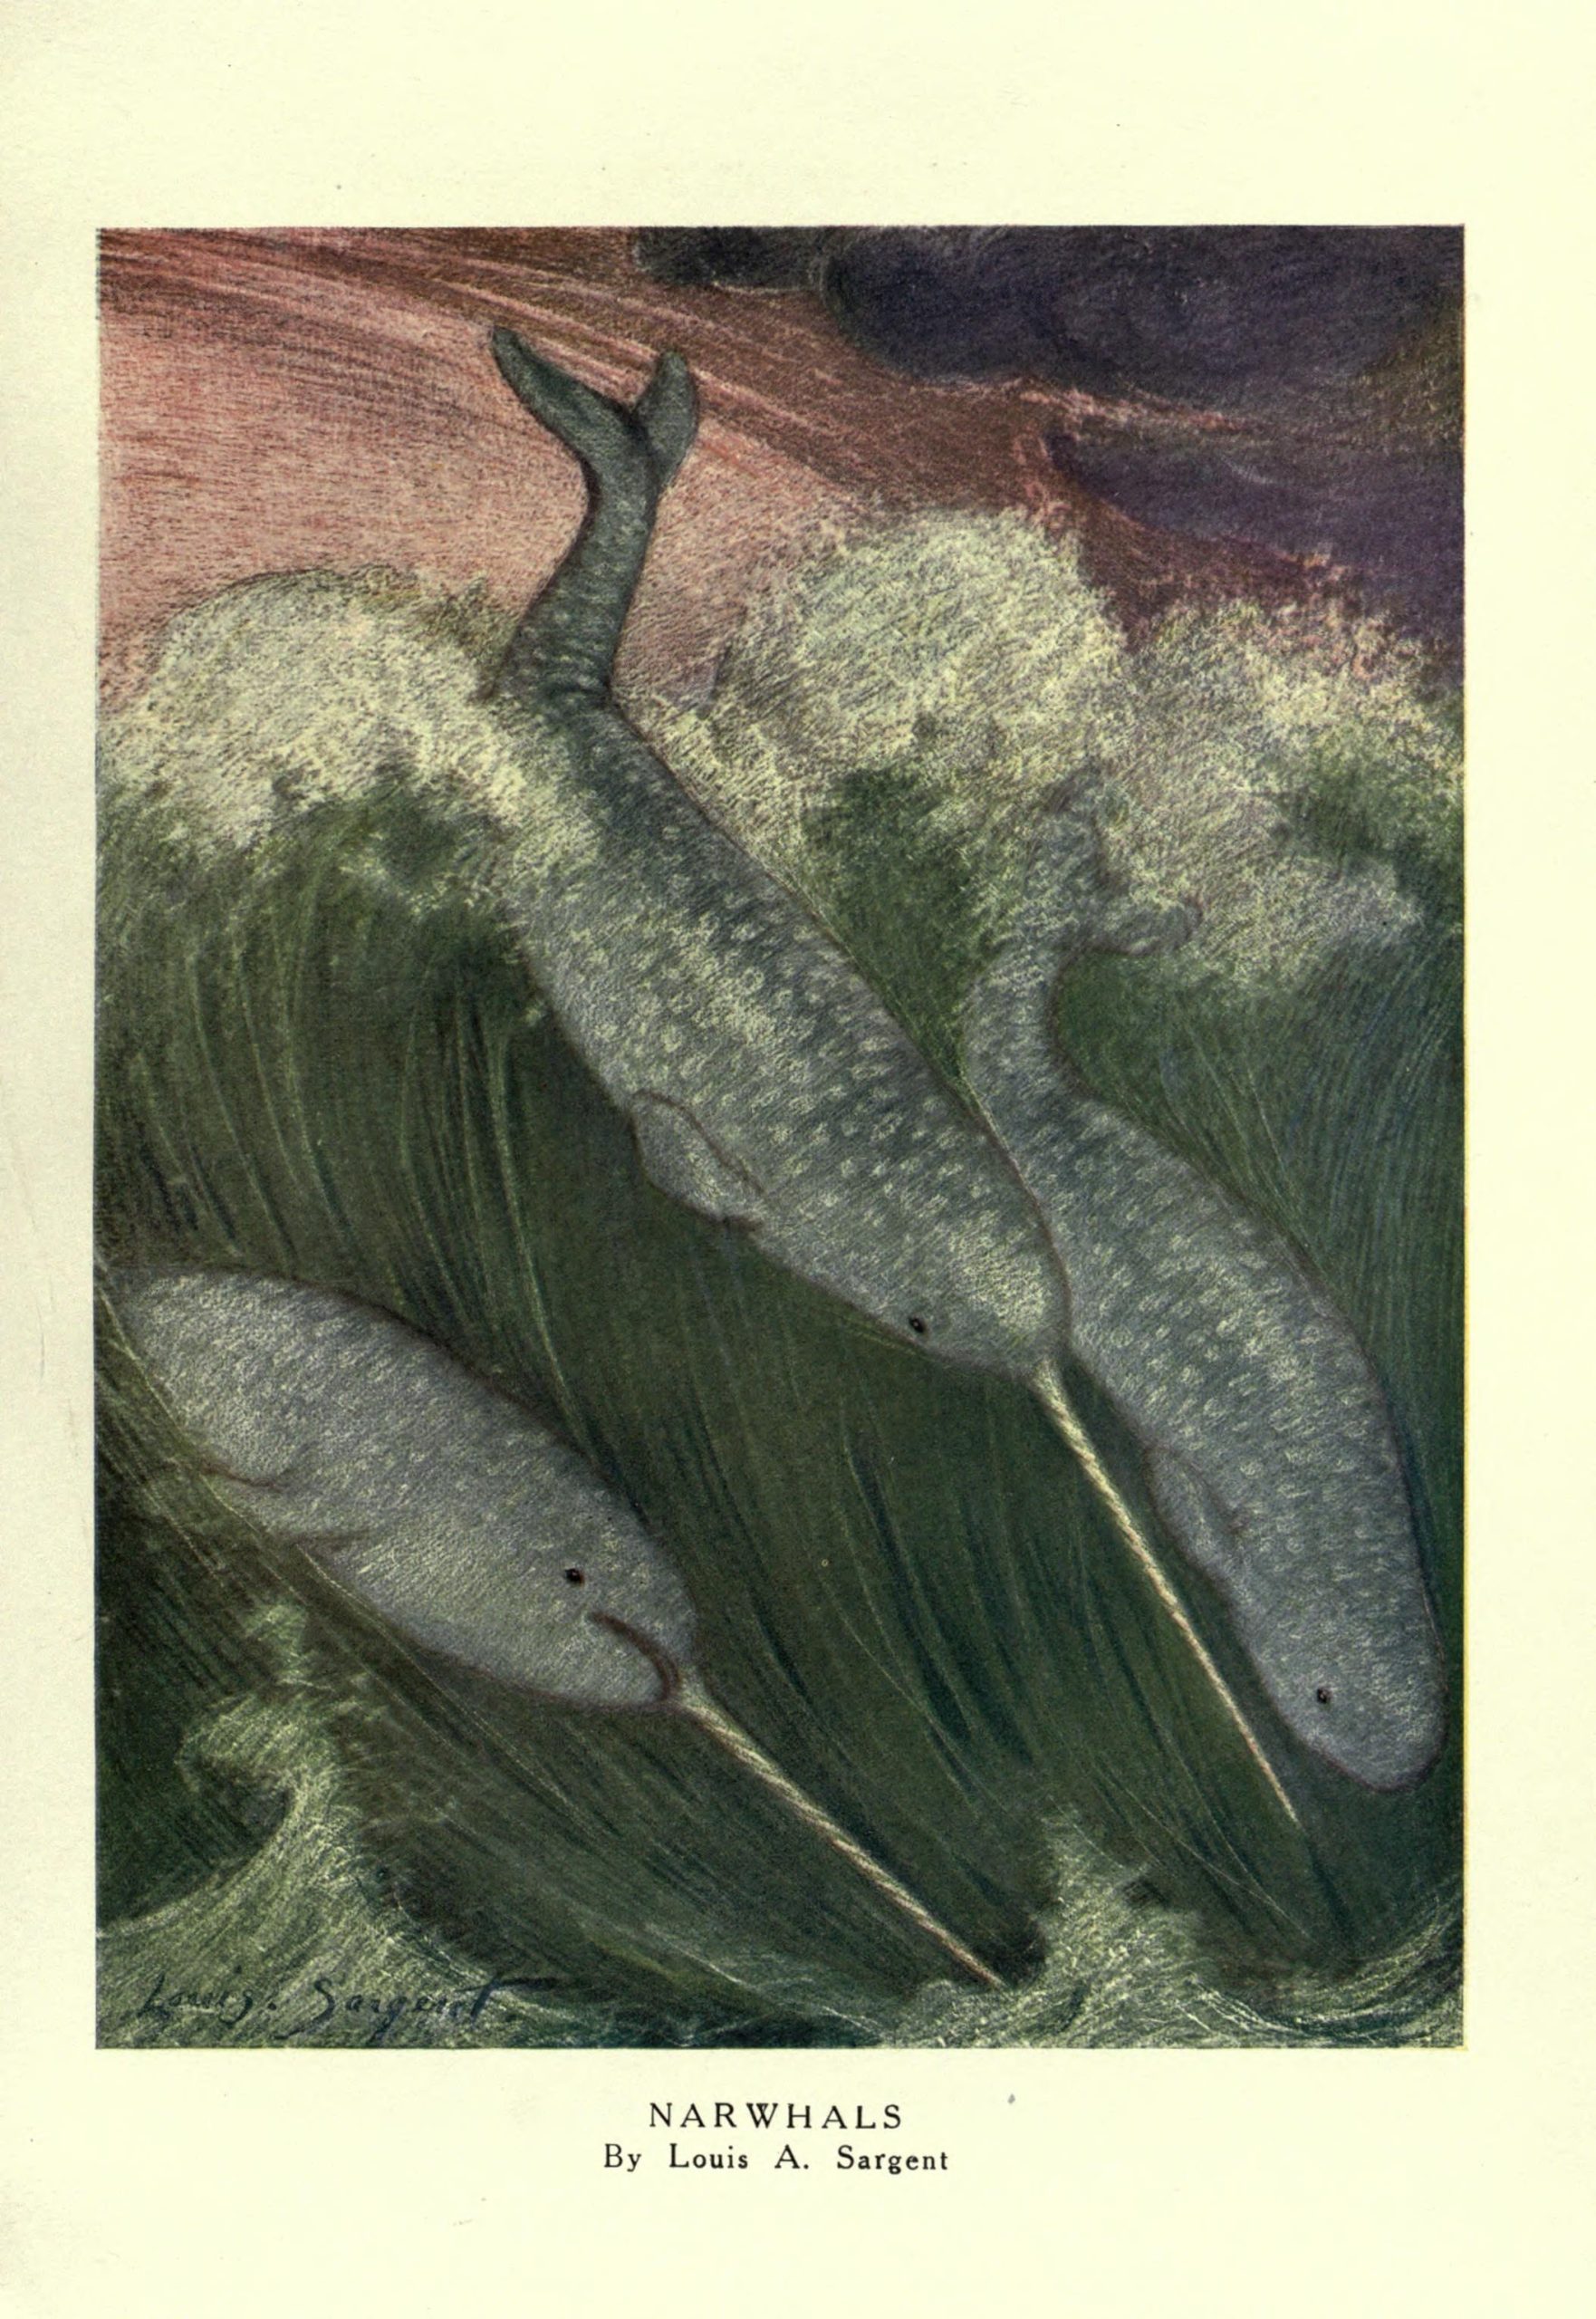 Three narwhals swimming along the waves in the sea